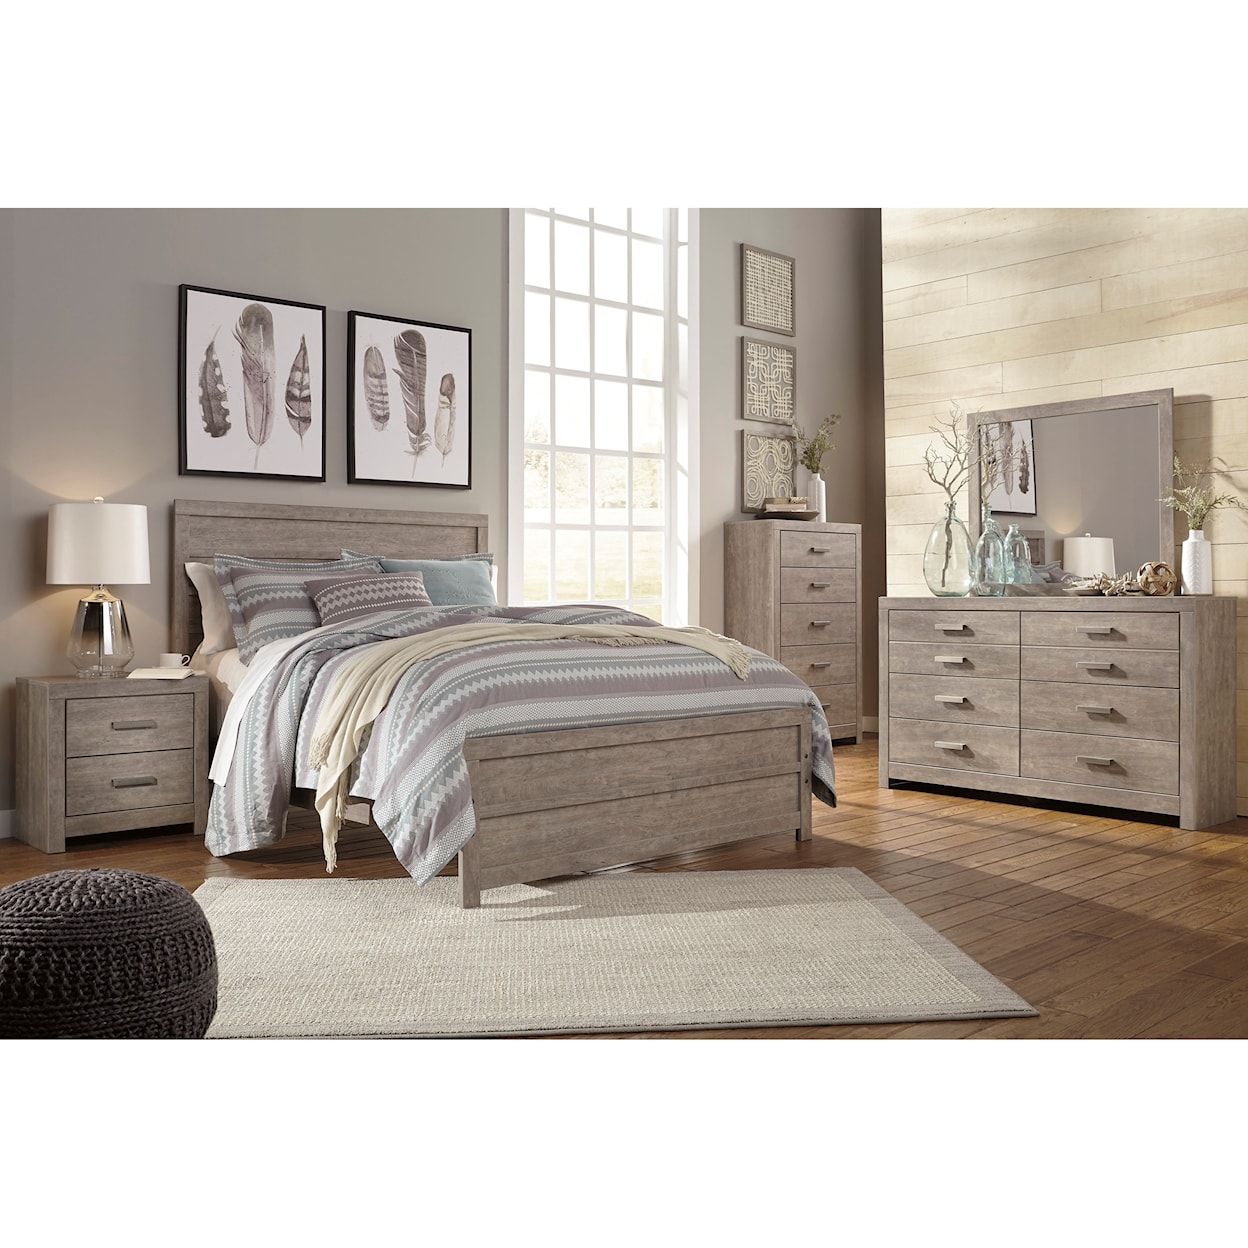 Signature Design by Ashley Culverbach 7PC Queen Bedroom Group